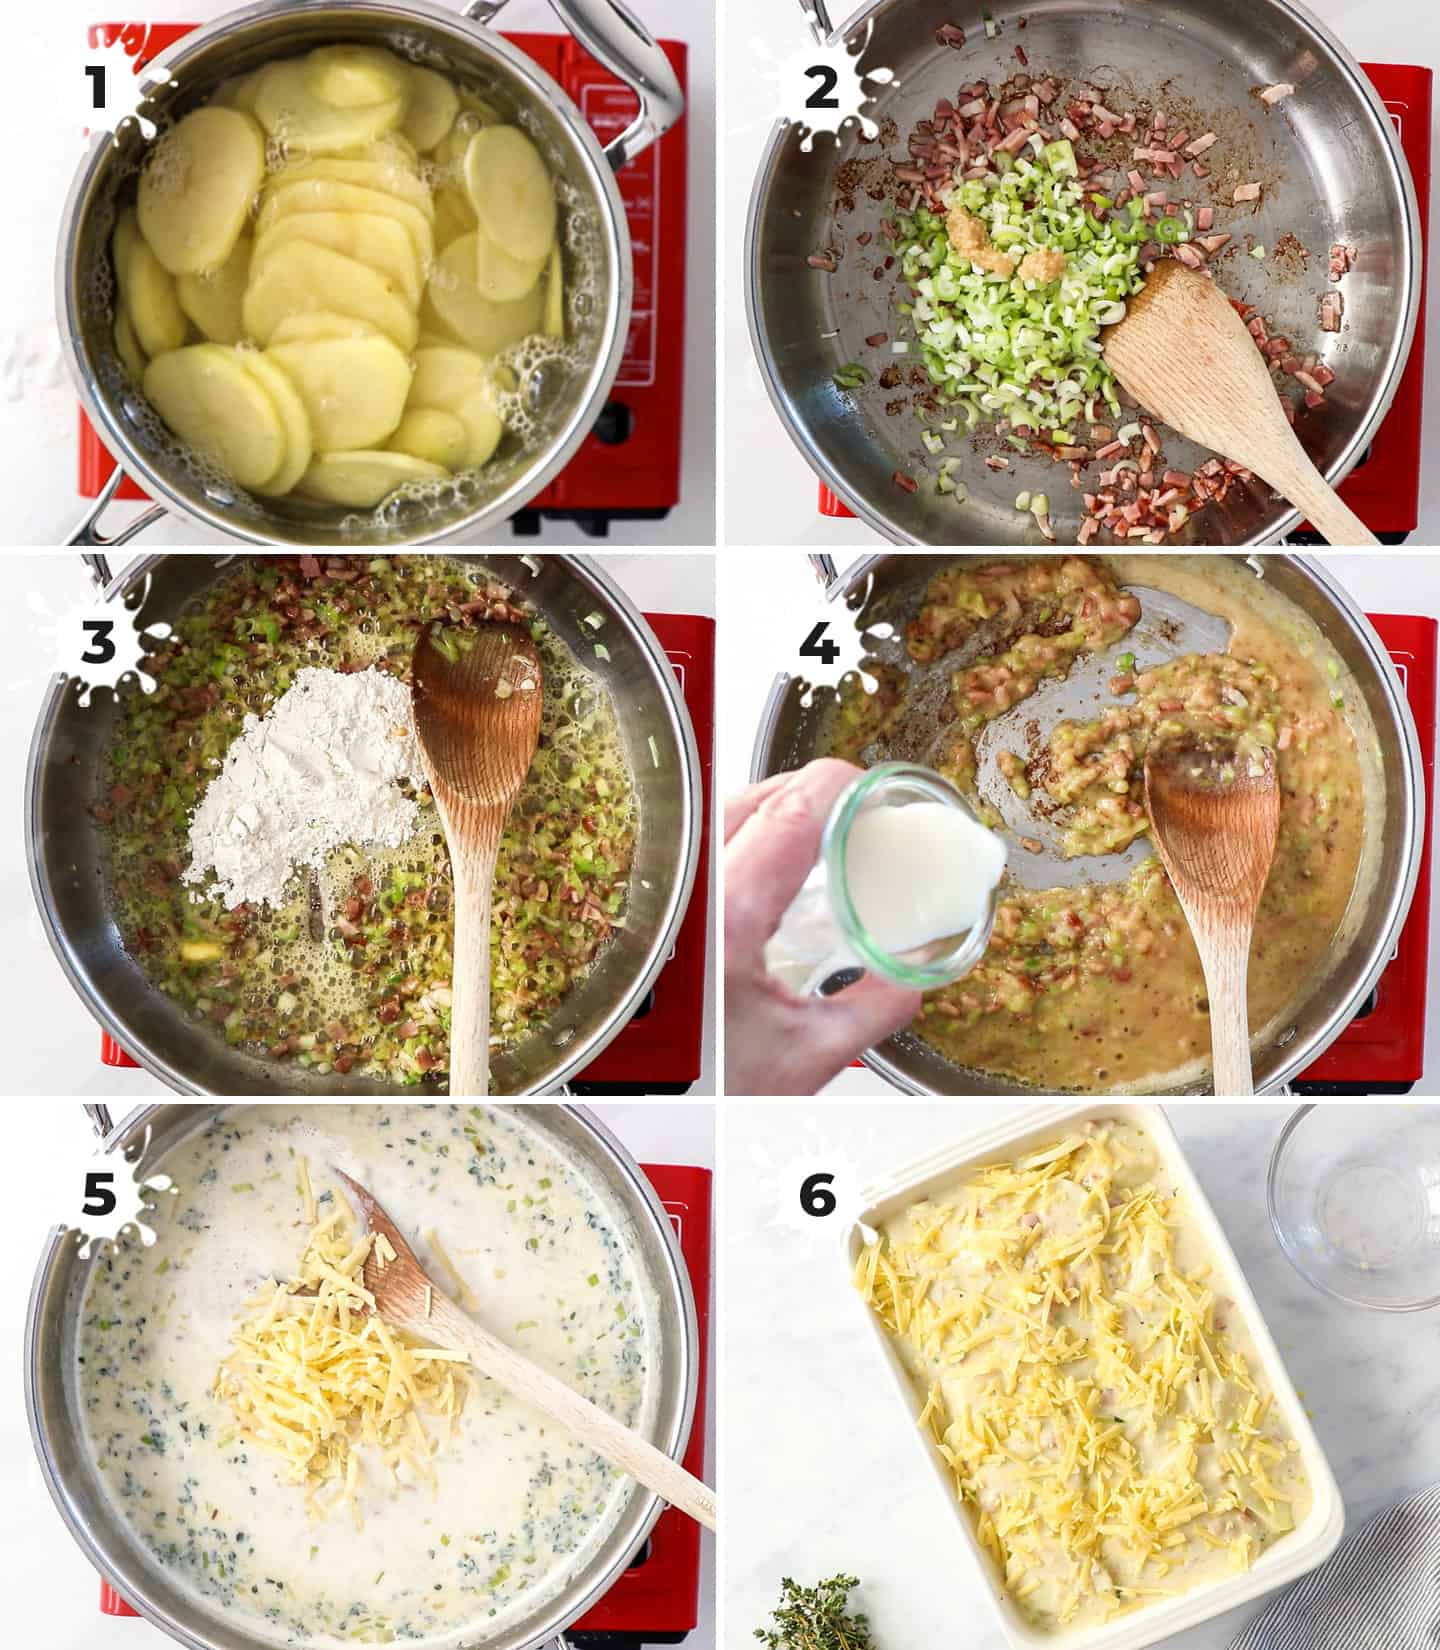 6 images showing the steps to making the potato bake.